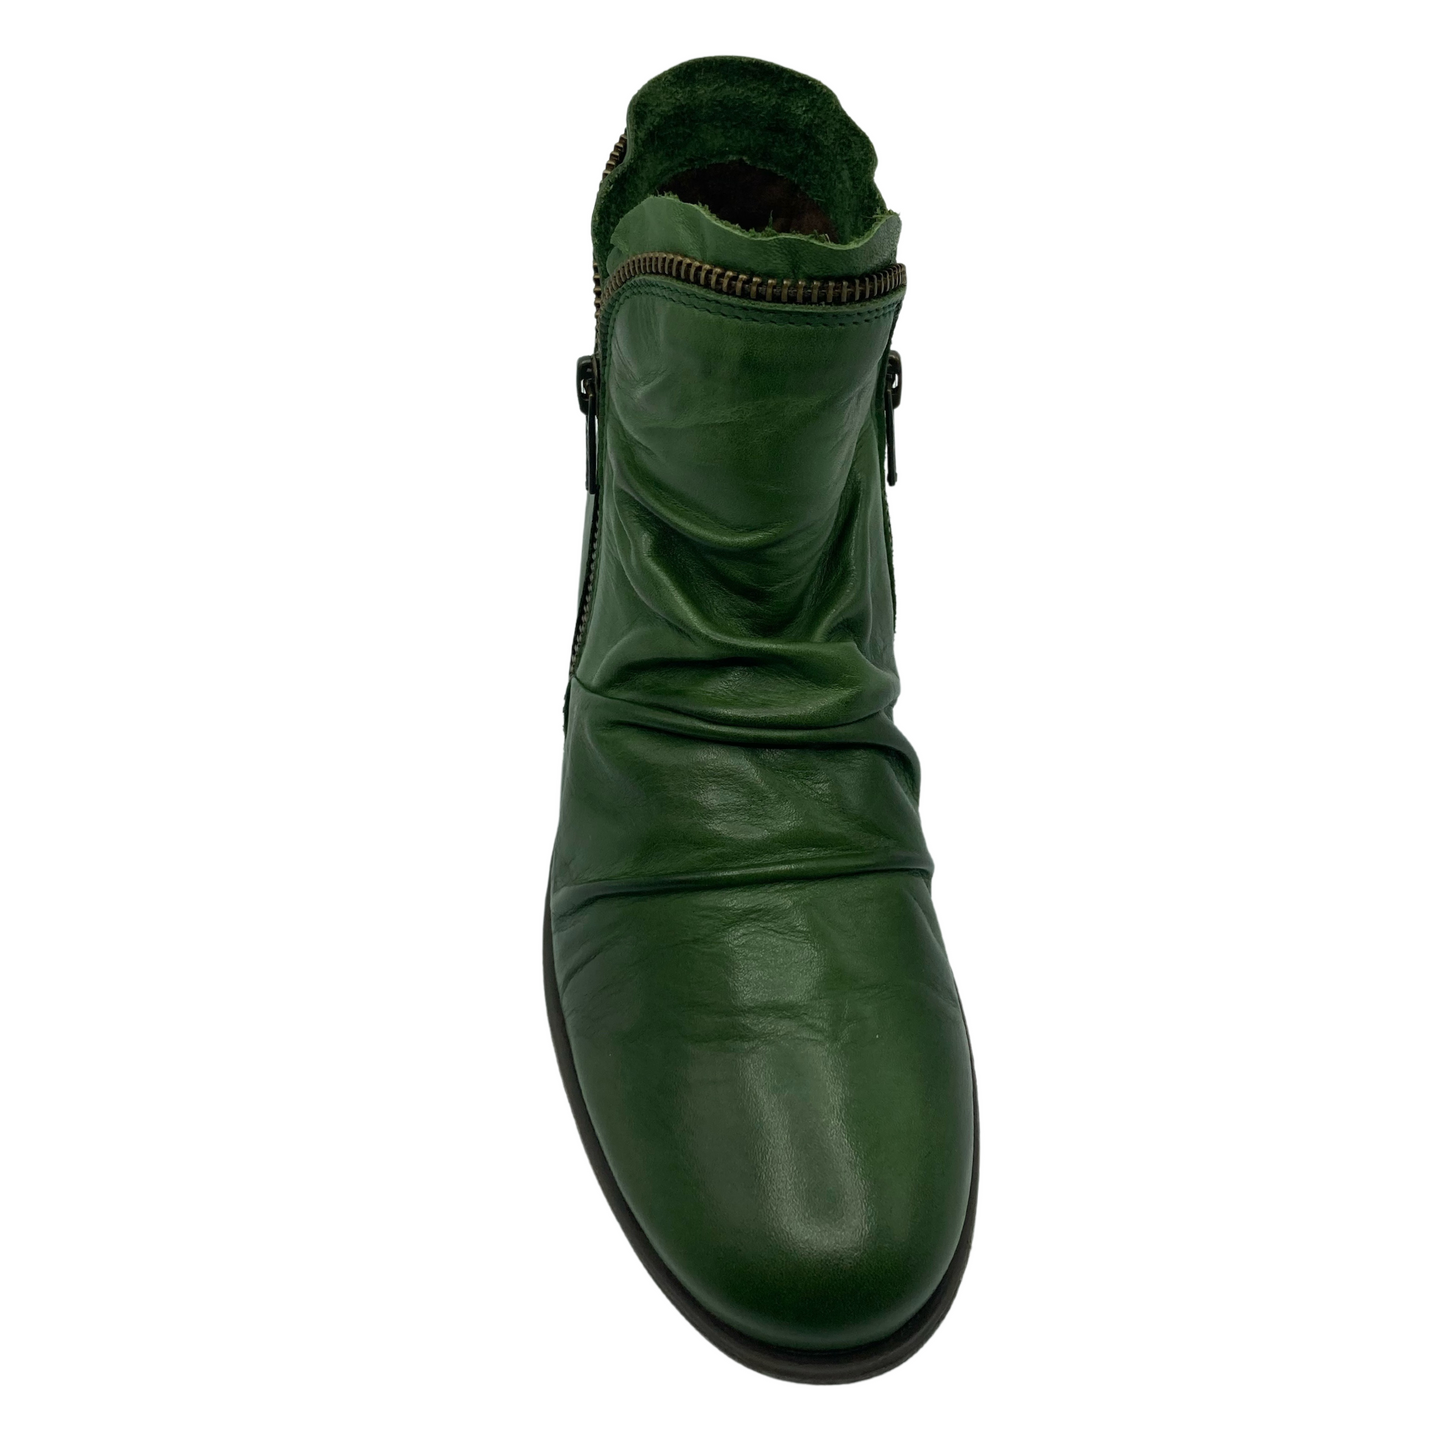 Top view of rounded toe, green leather boot with zipper detail